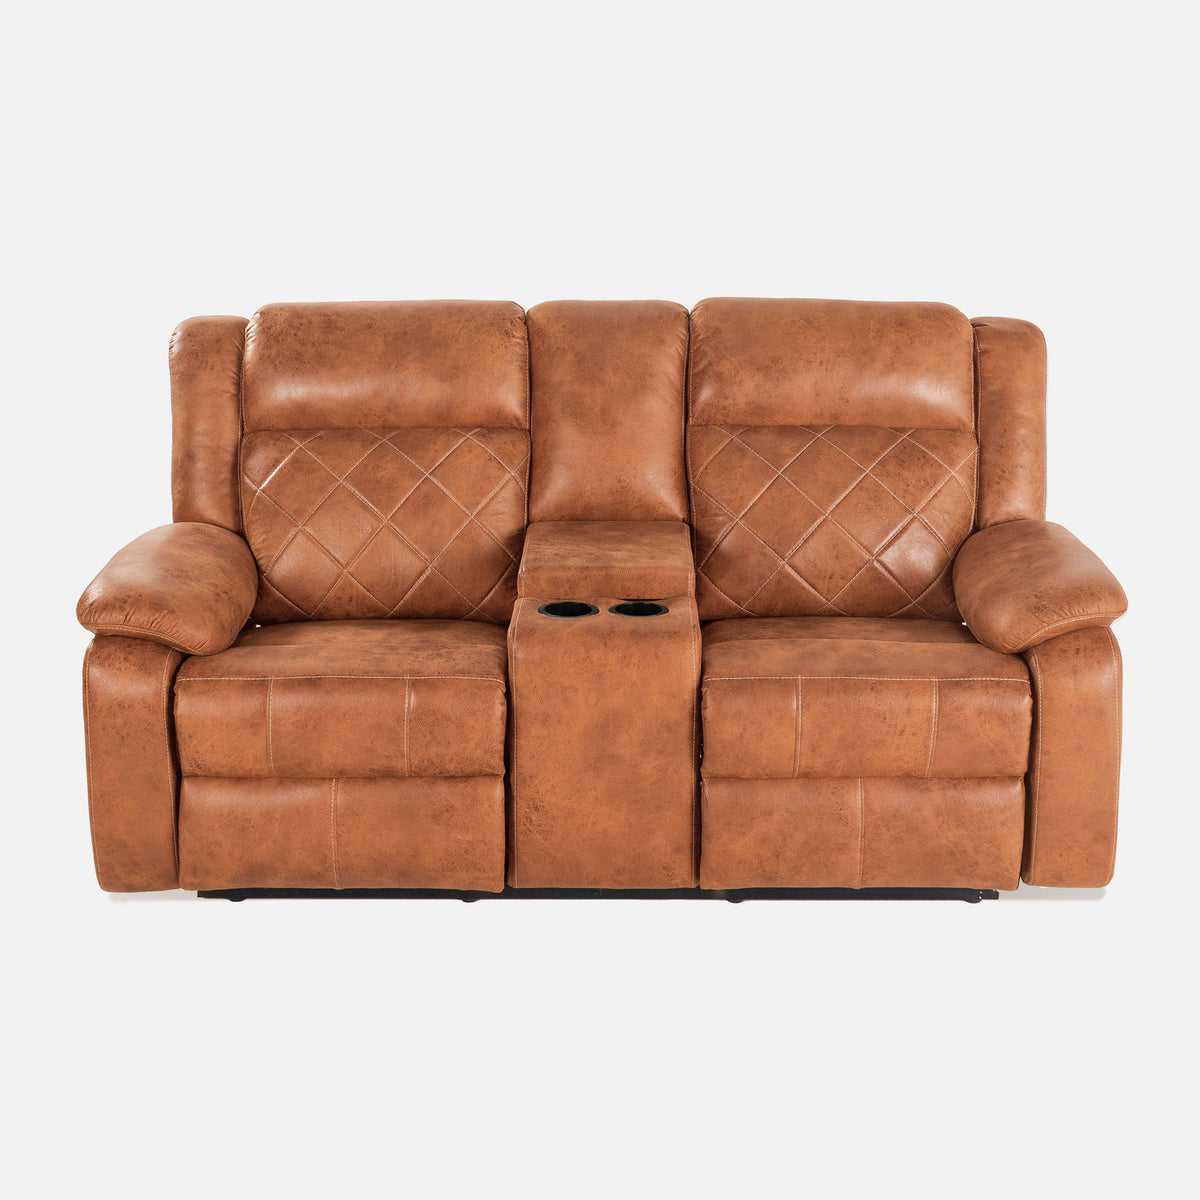 Marvin 2 Seater Recliner with Console